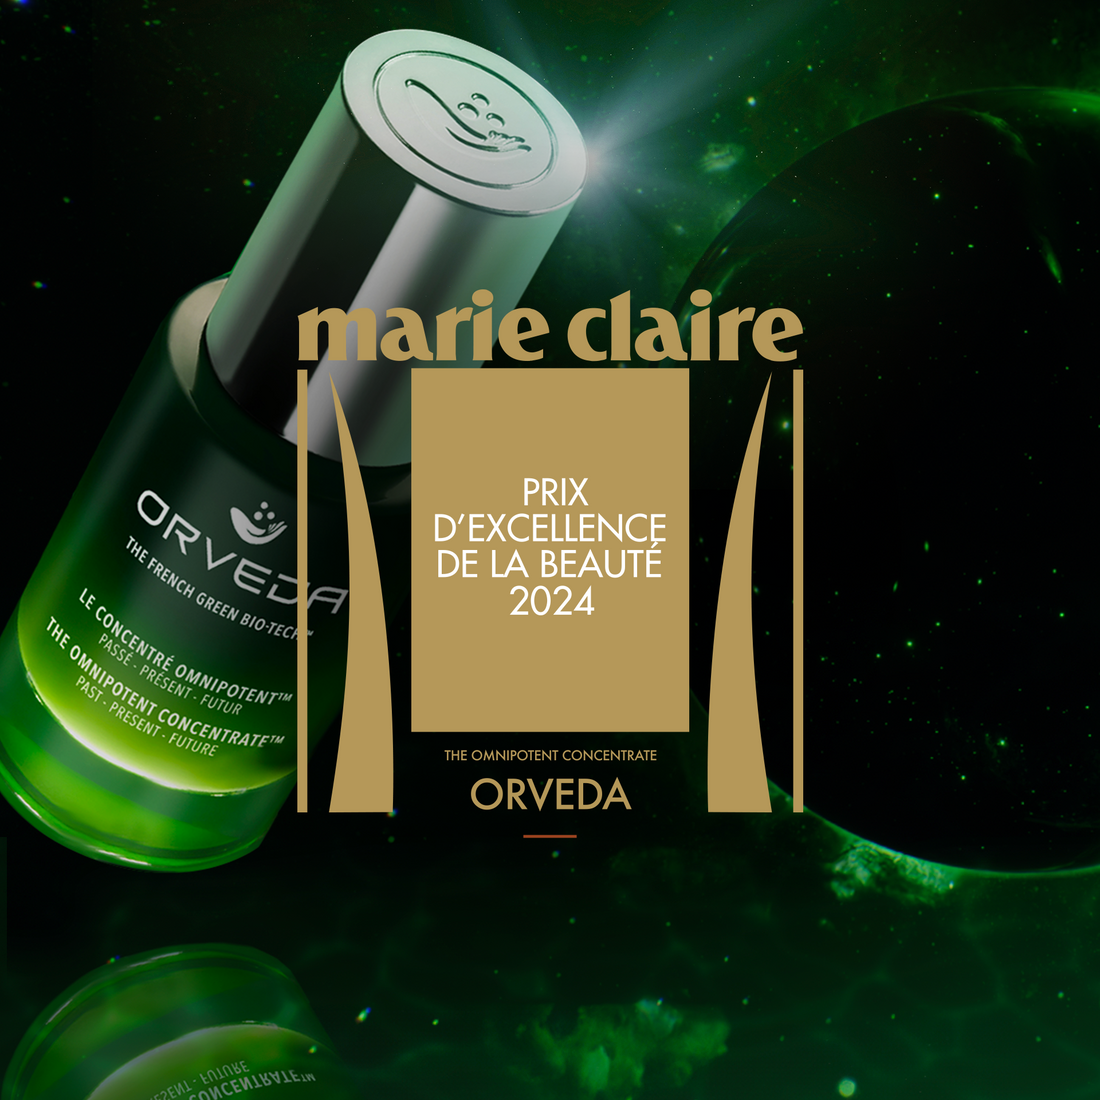 THE OMNIPOTENT CONCENTRATE HAS WON LE PRIX D'EXCELLENCE MARIE CLAIRE INTERNATIONAL 2024